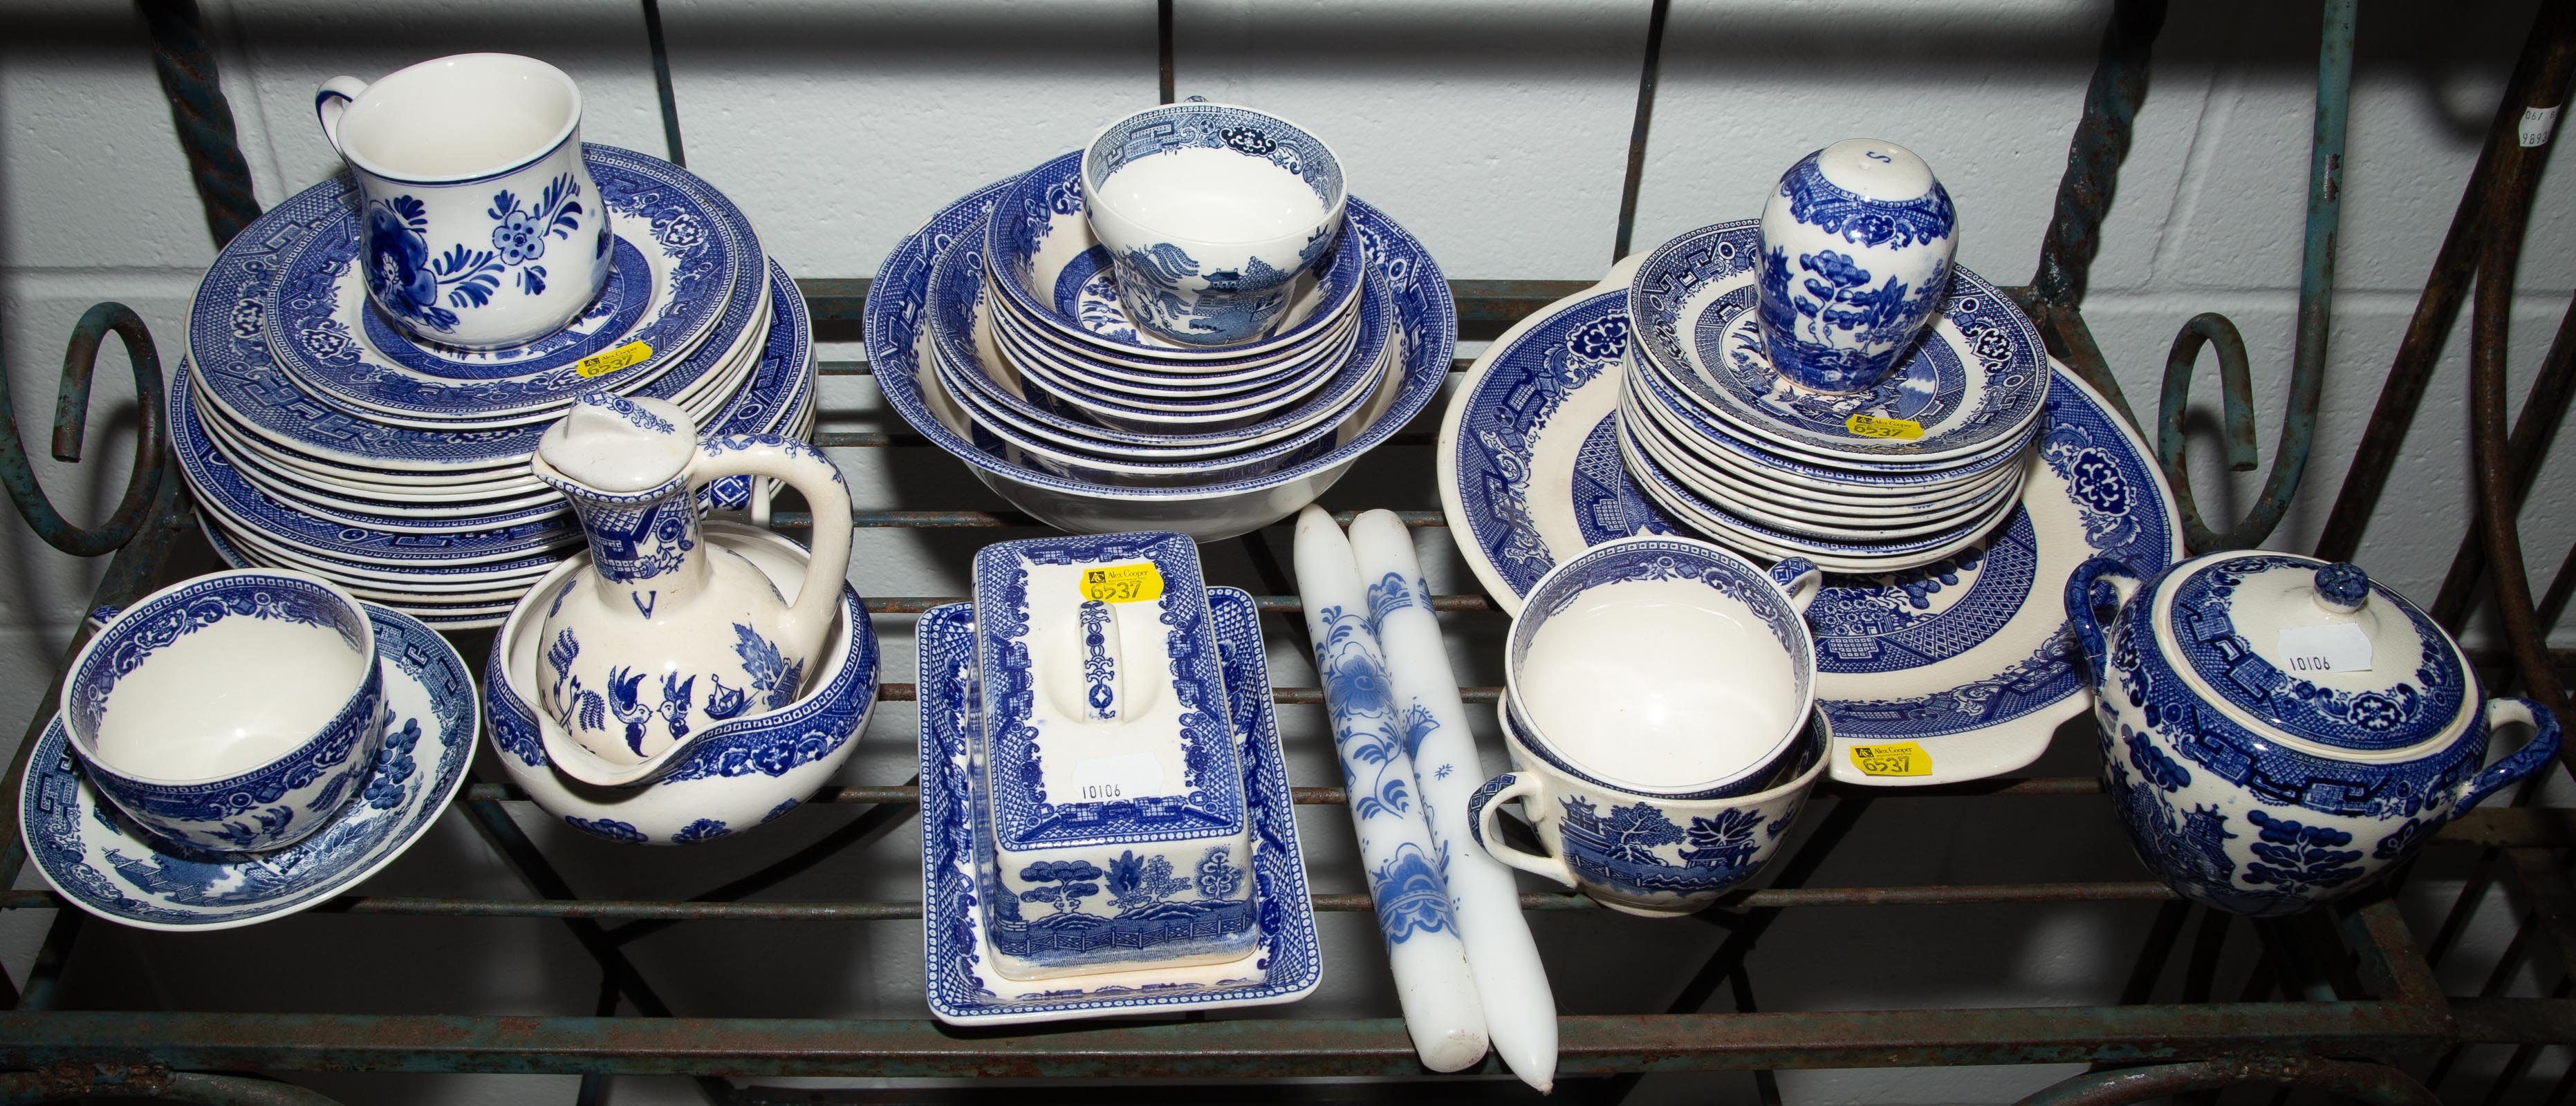 GROUP OF BLUE WILLOW CHINA 20th